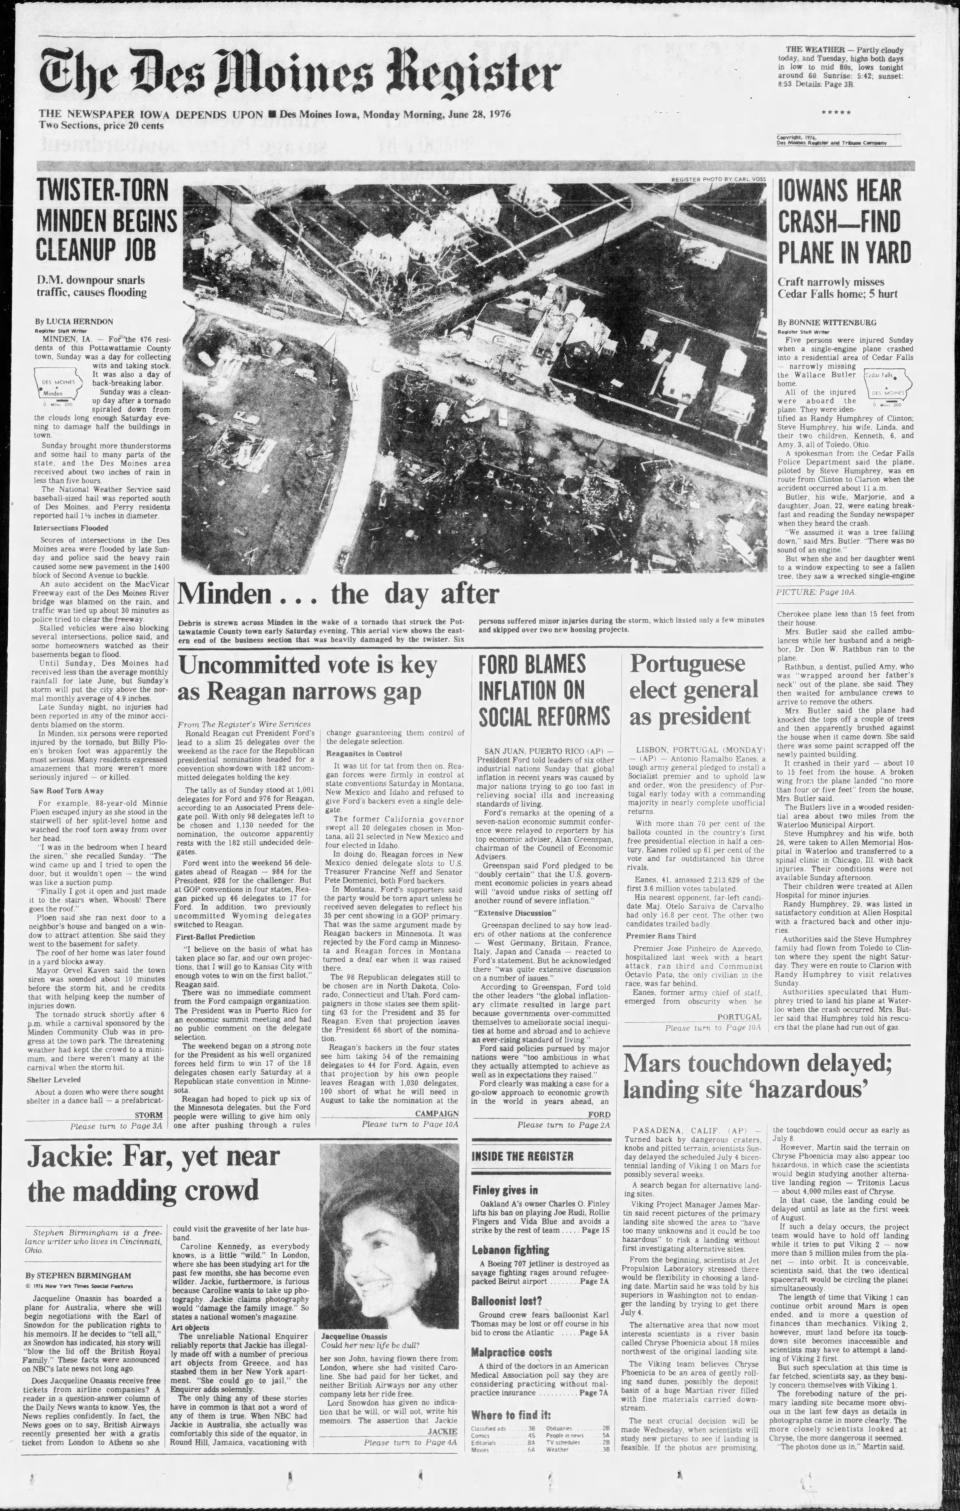 A June 1976 edition of the Des Moines Register reports on Minden's recovery effort after a devastating tornado. The town was hit and several damaged again in April 26 storms.